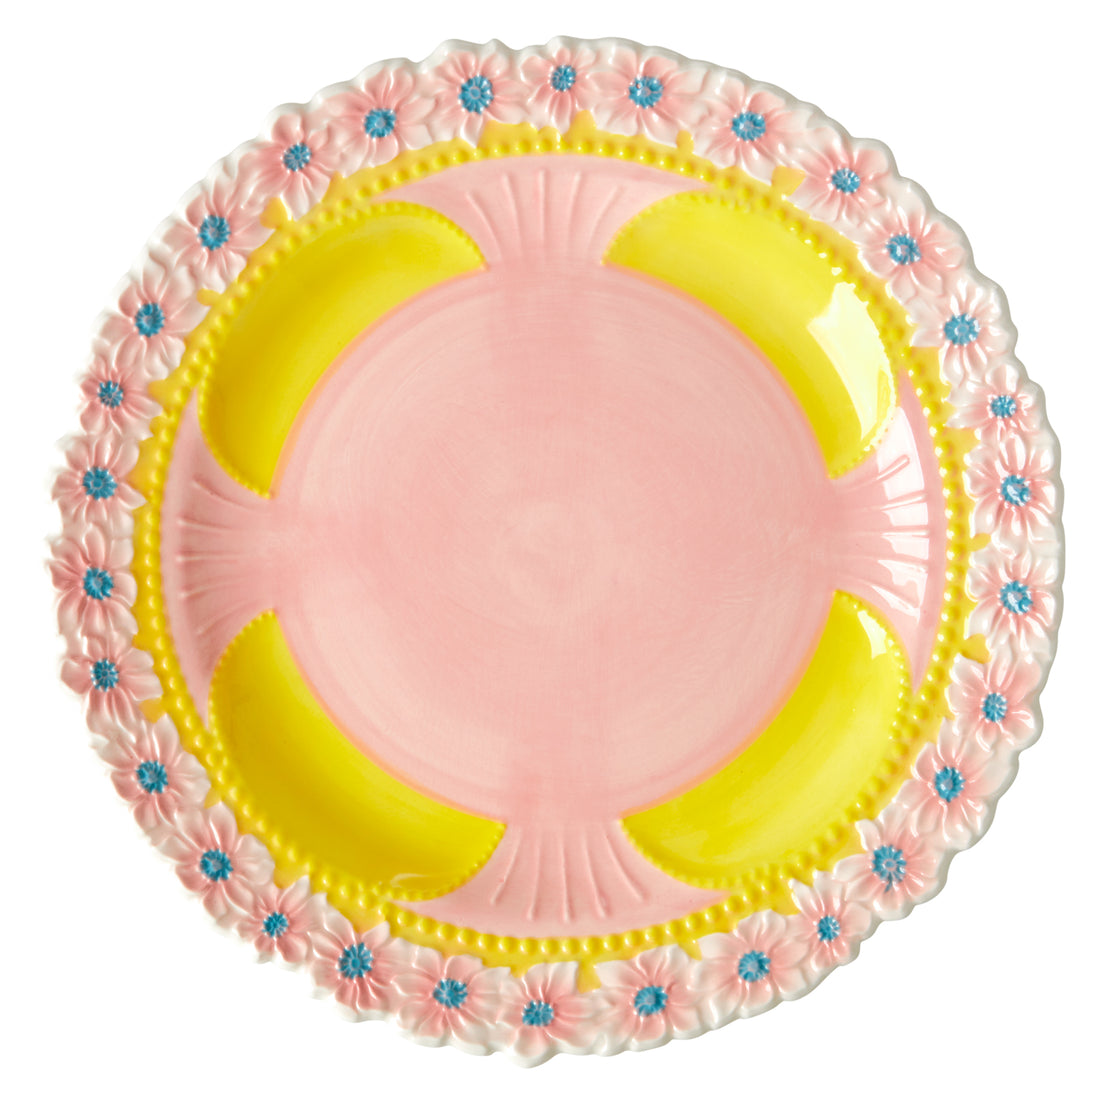 rice-dk-ceramic-dinner-plate-with-embossed-flower-design-yellow-rice-cedpl-emy- (1)